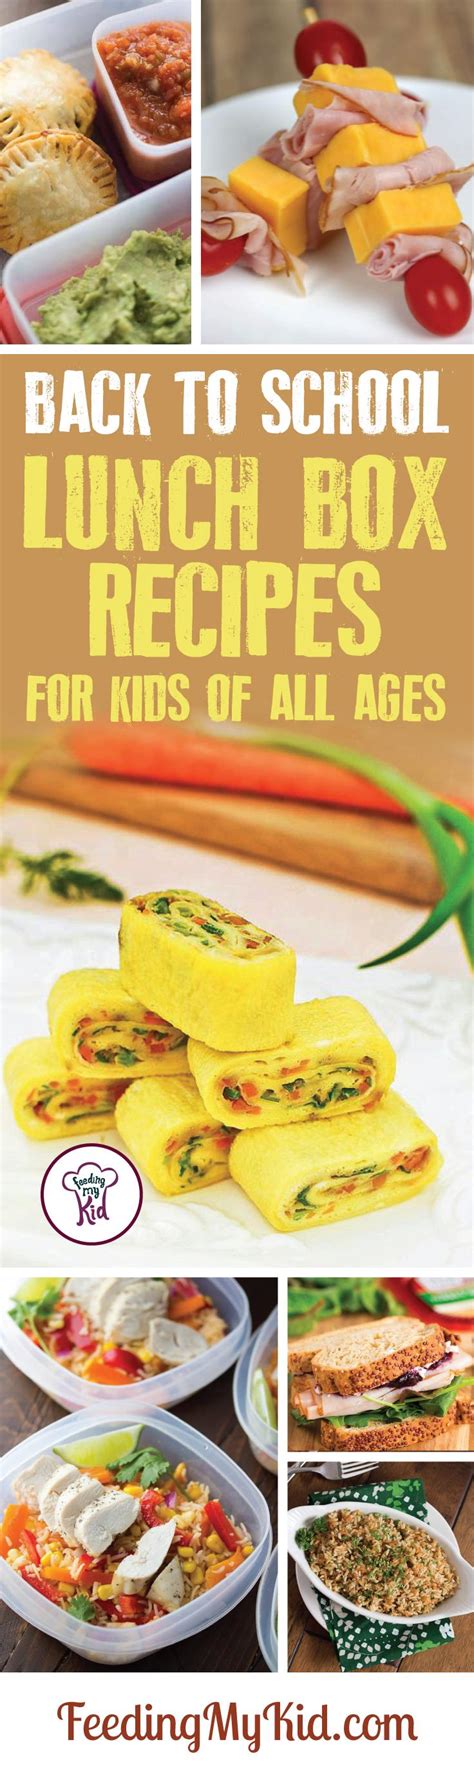 school lunch box recipes  kids   ages